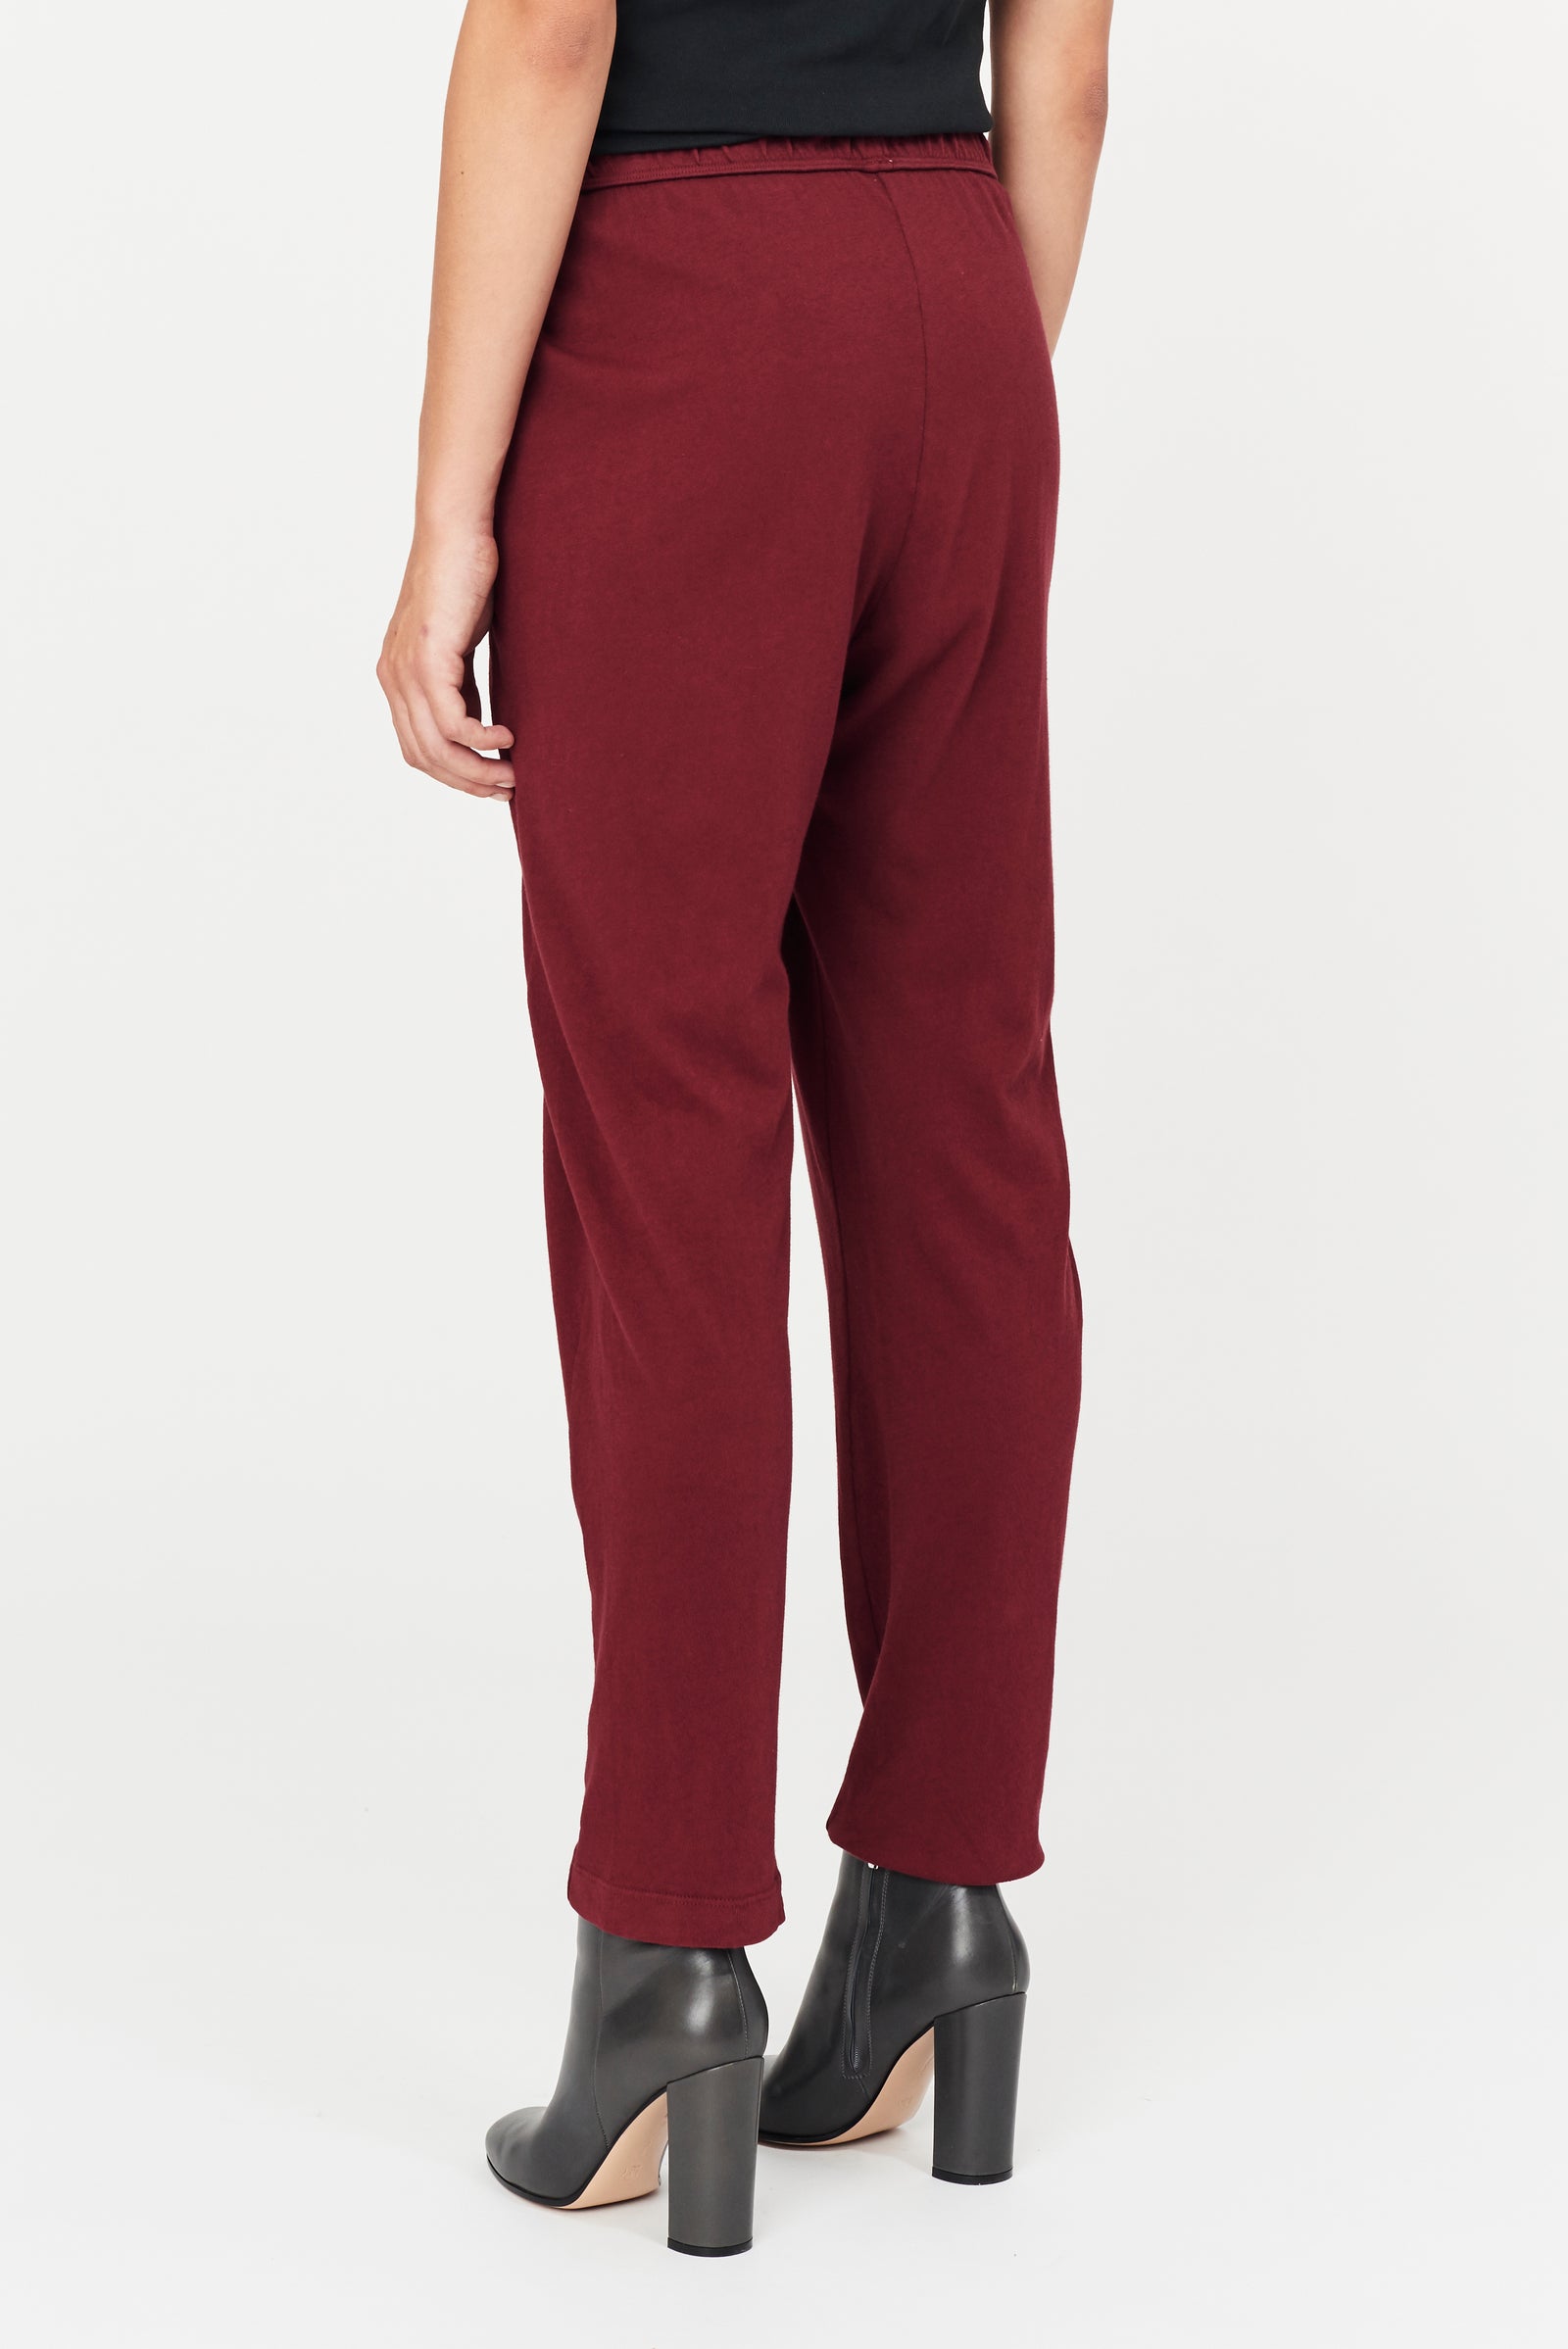 Sienna Classic Jersey Easy Pant Side Close-Up View